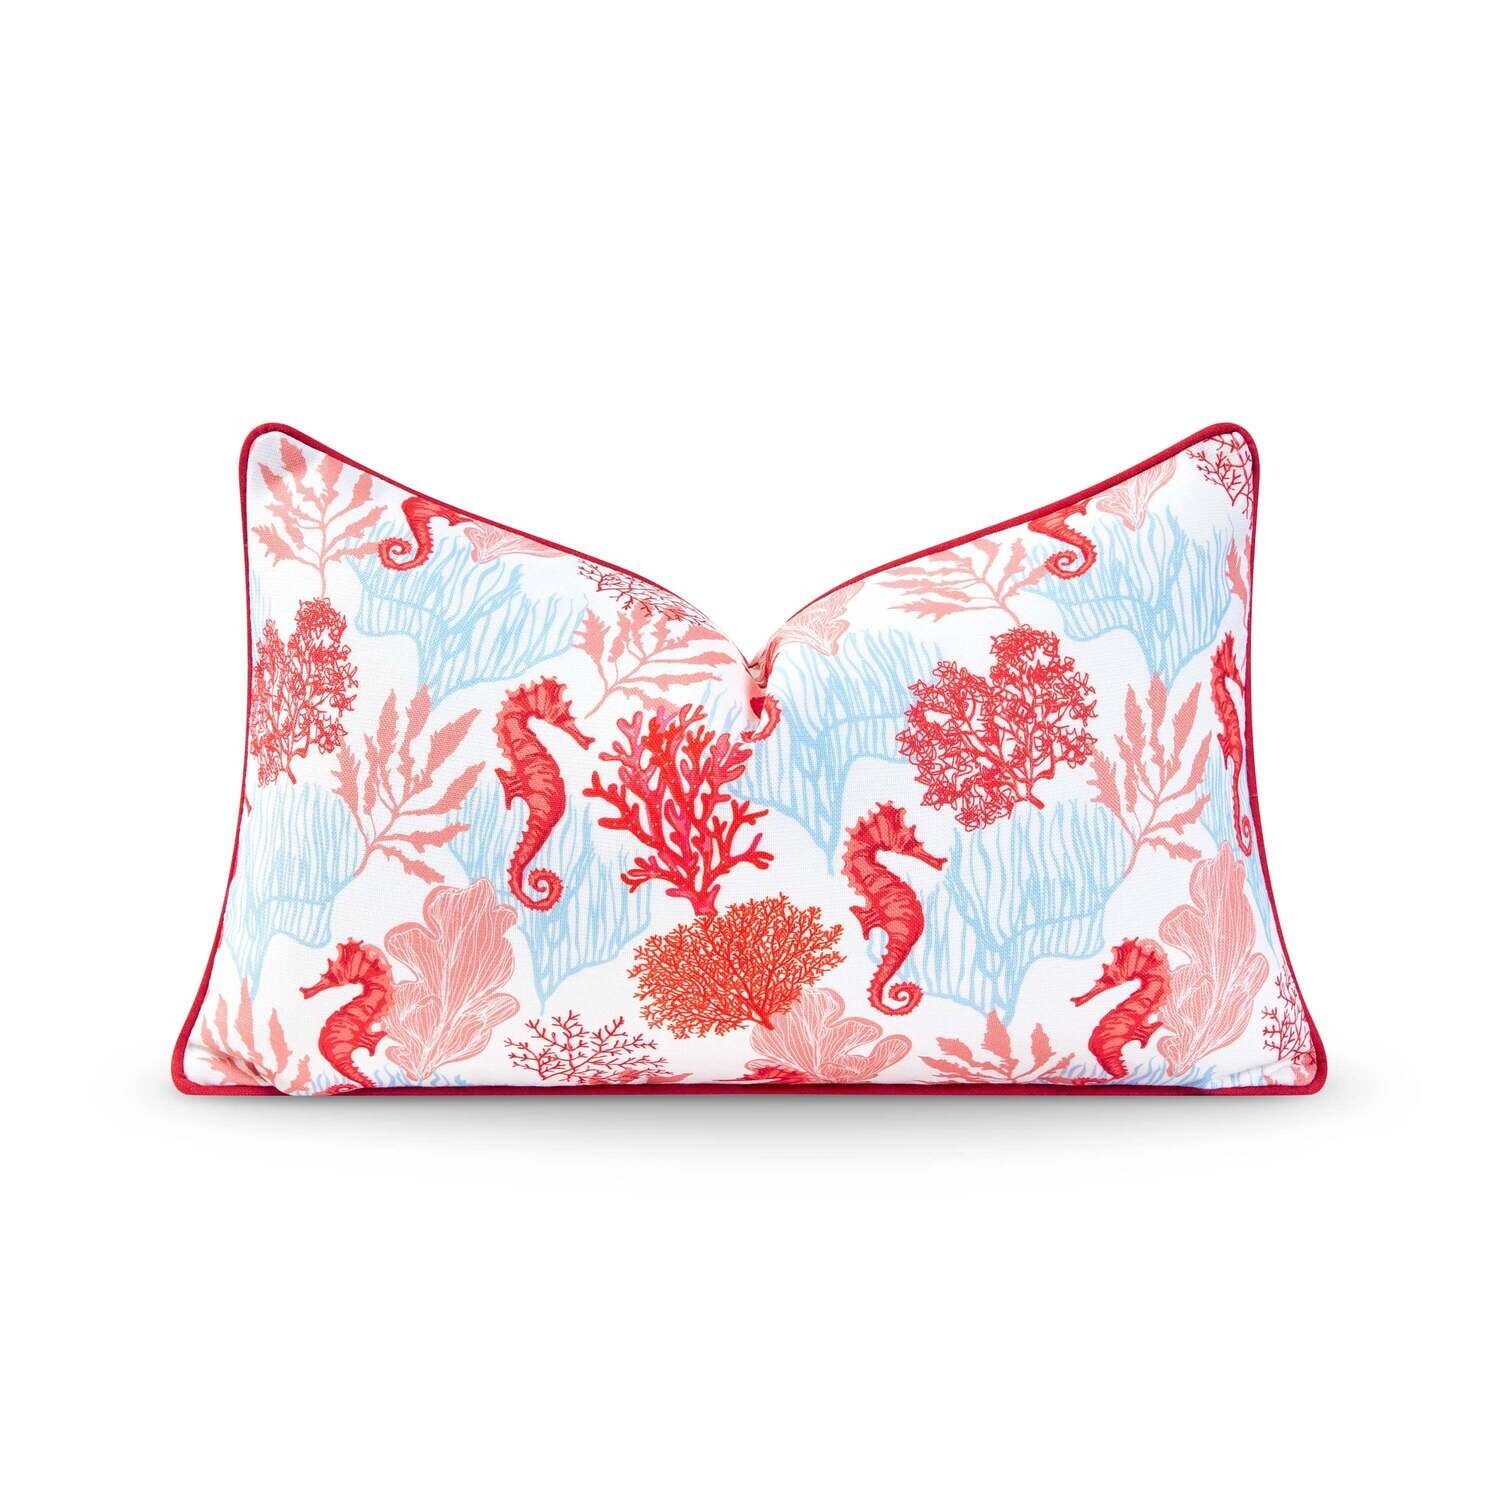 Coastal Indoor Outdoor Lumbar Pillow Cover, Coral Seahorse, Red Pink Baby Blue, 12"x20"